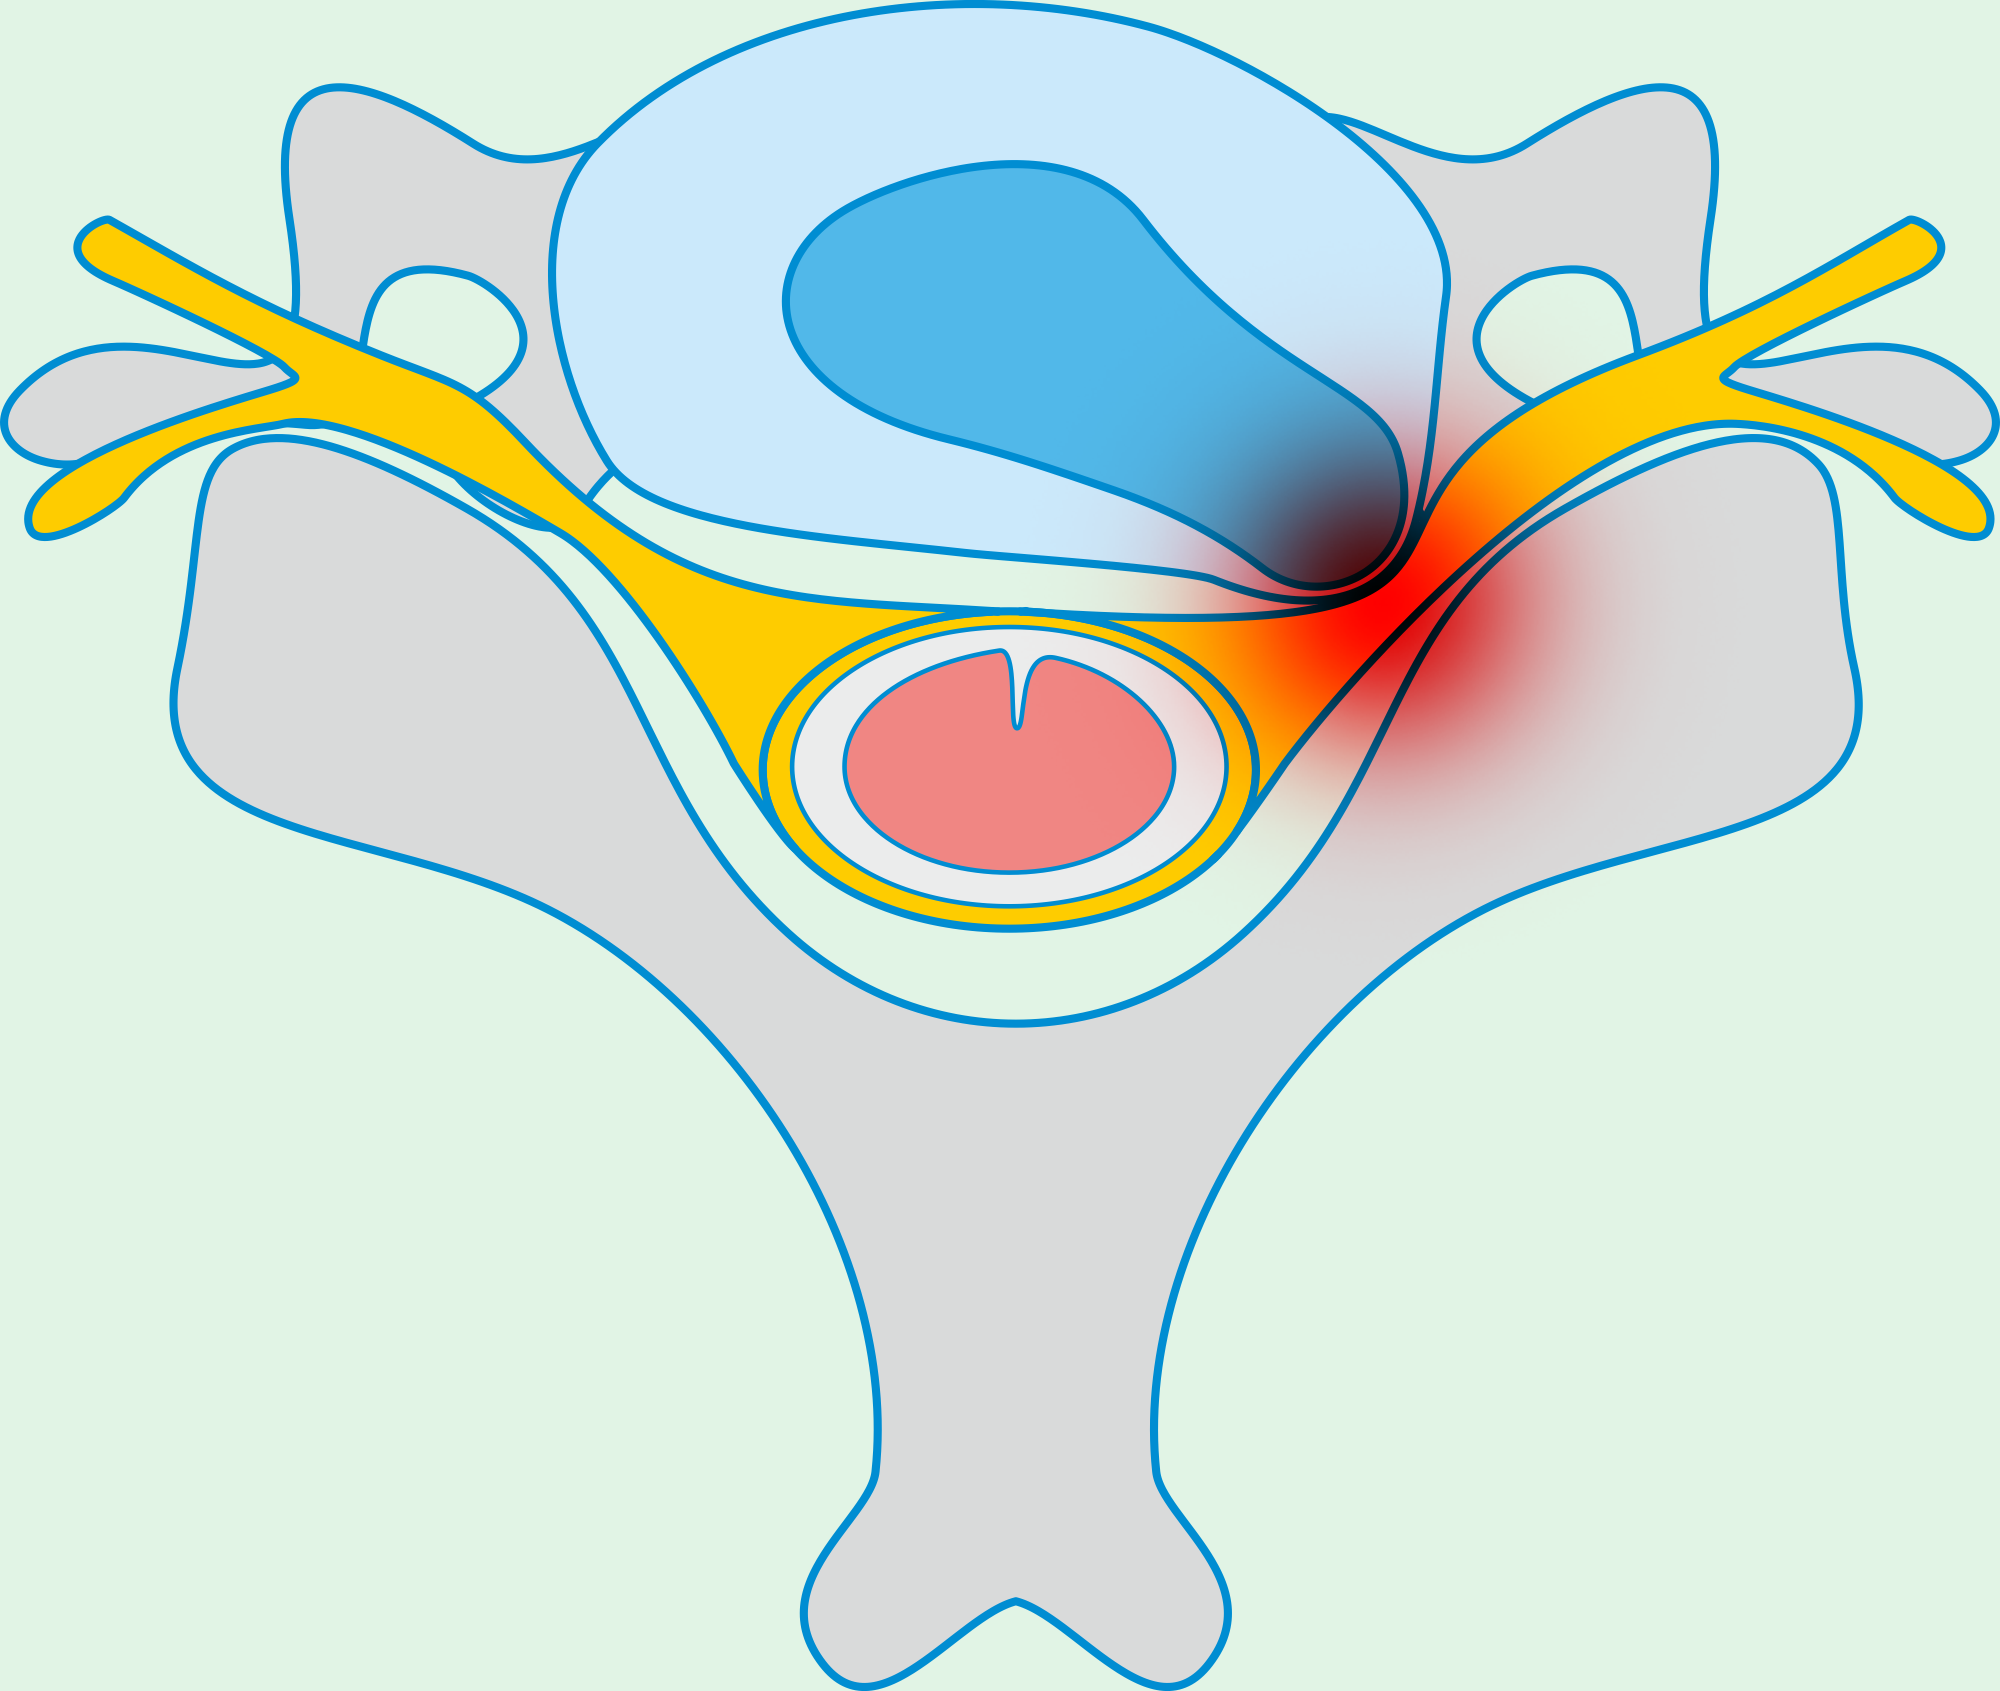 Protrusion of intervertebral disc, treatment of disc protrusion, back pain